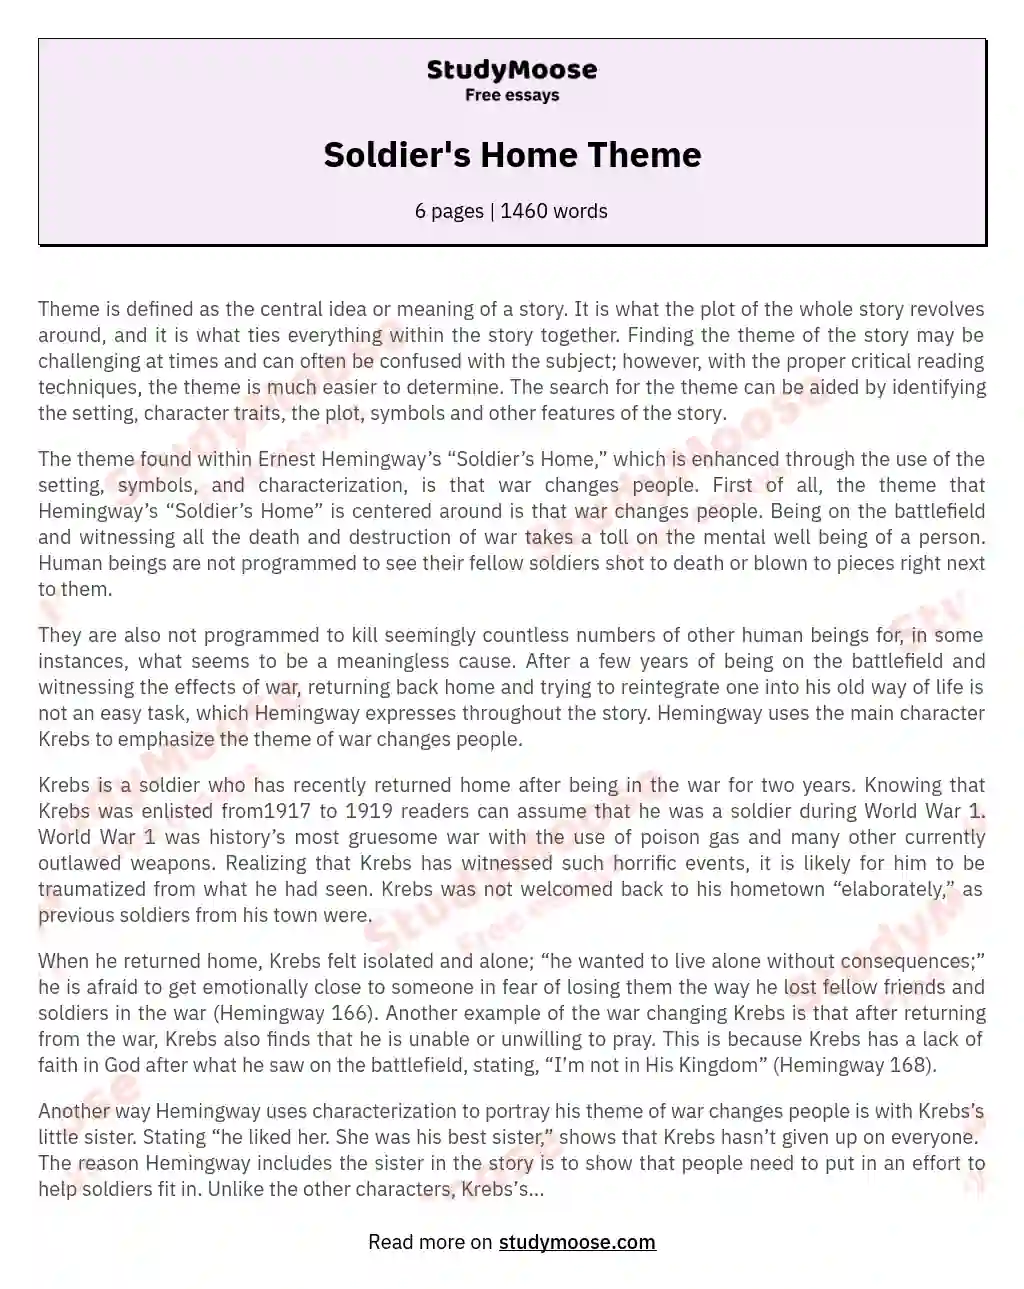 Soldier's Home Theme essay